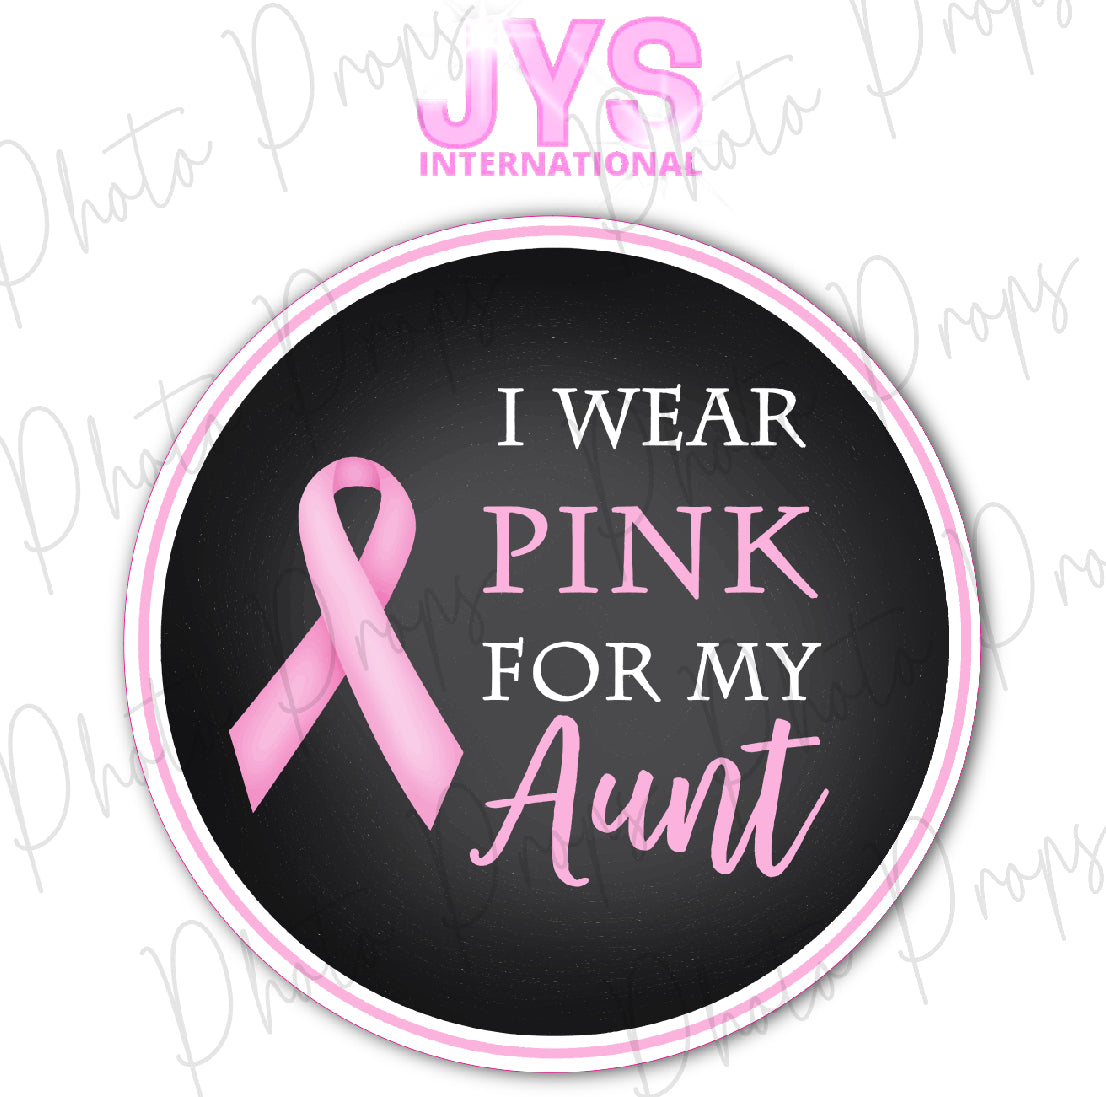 P1280: I WEAR PINK FOR MY AUNT